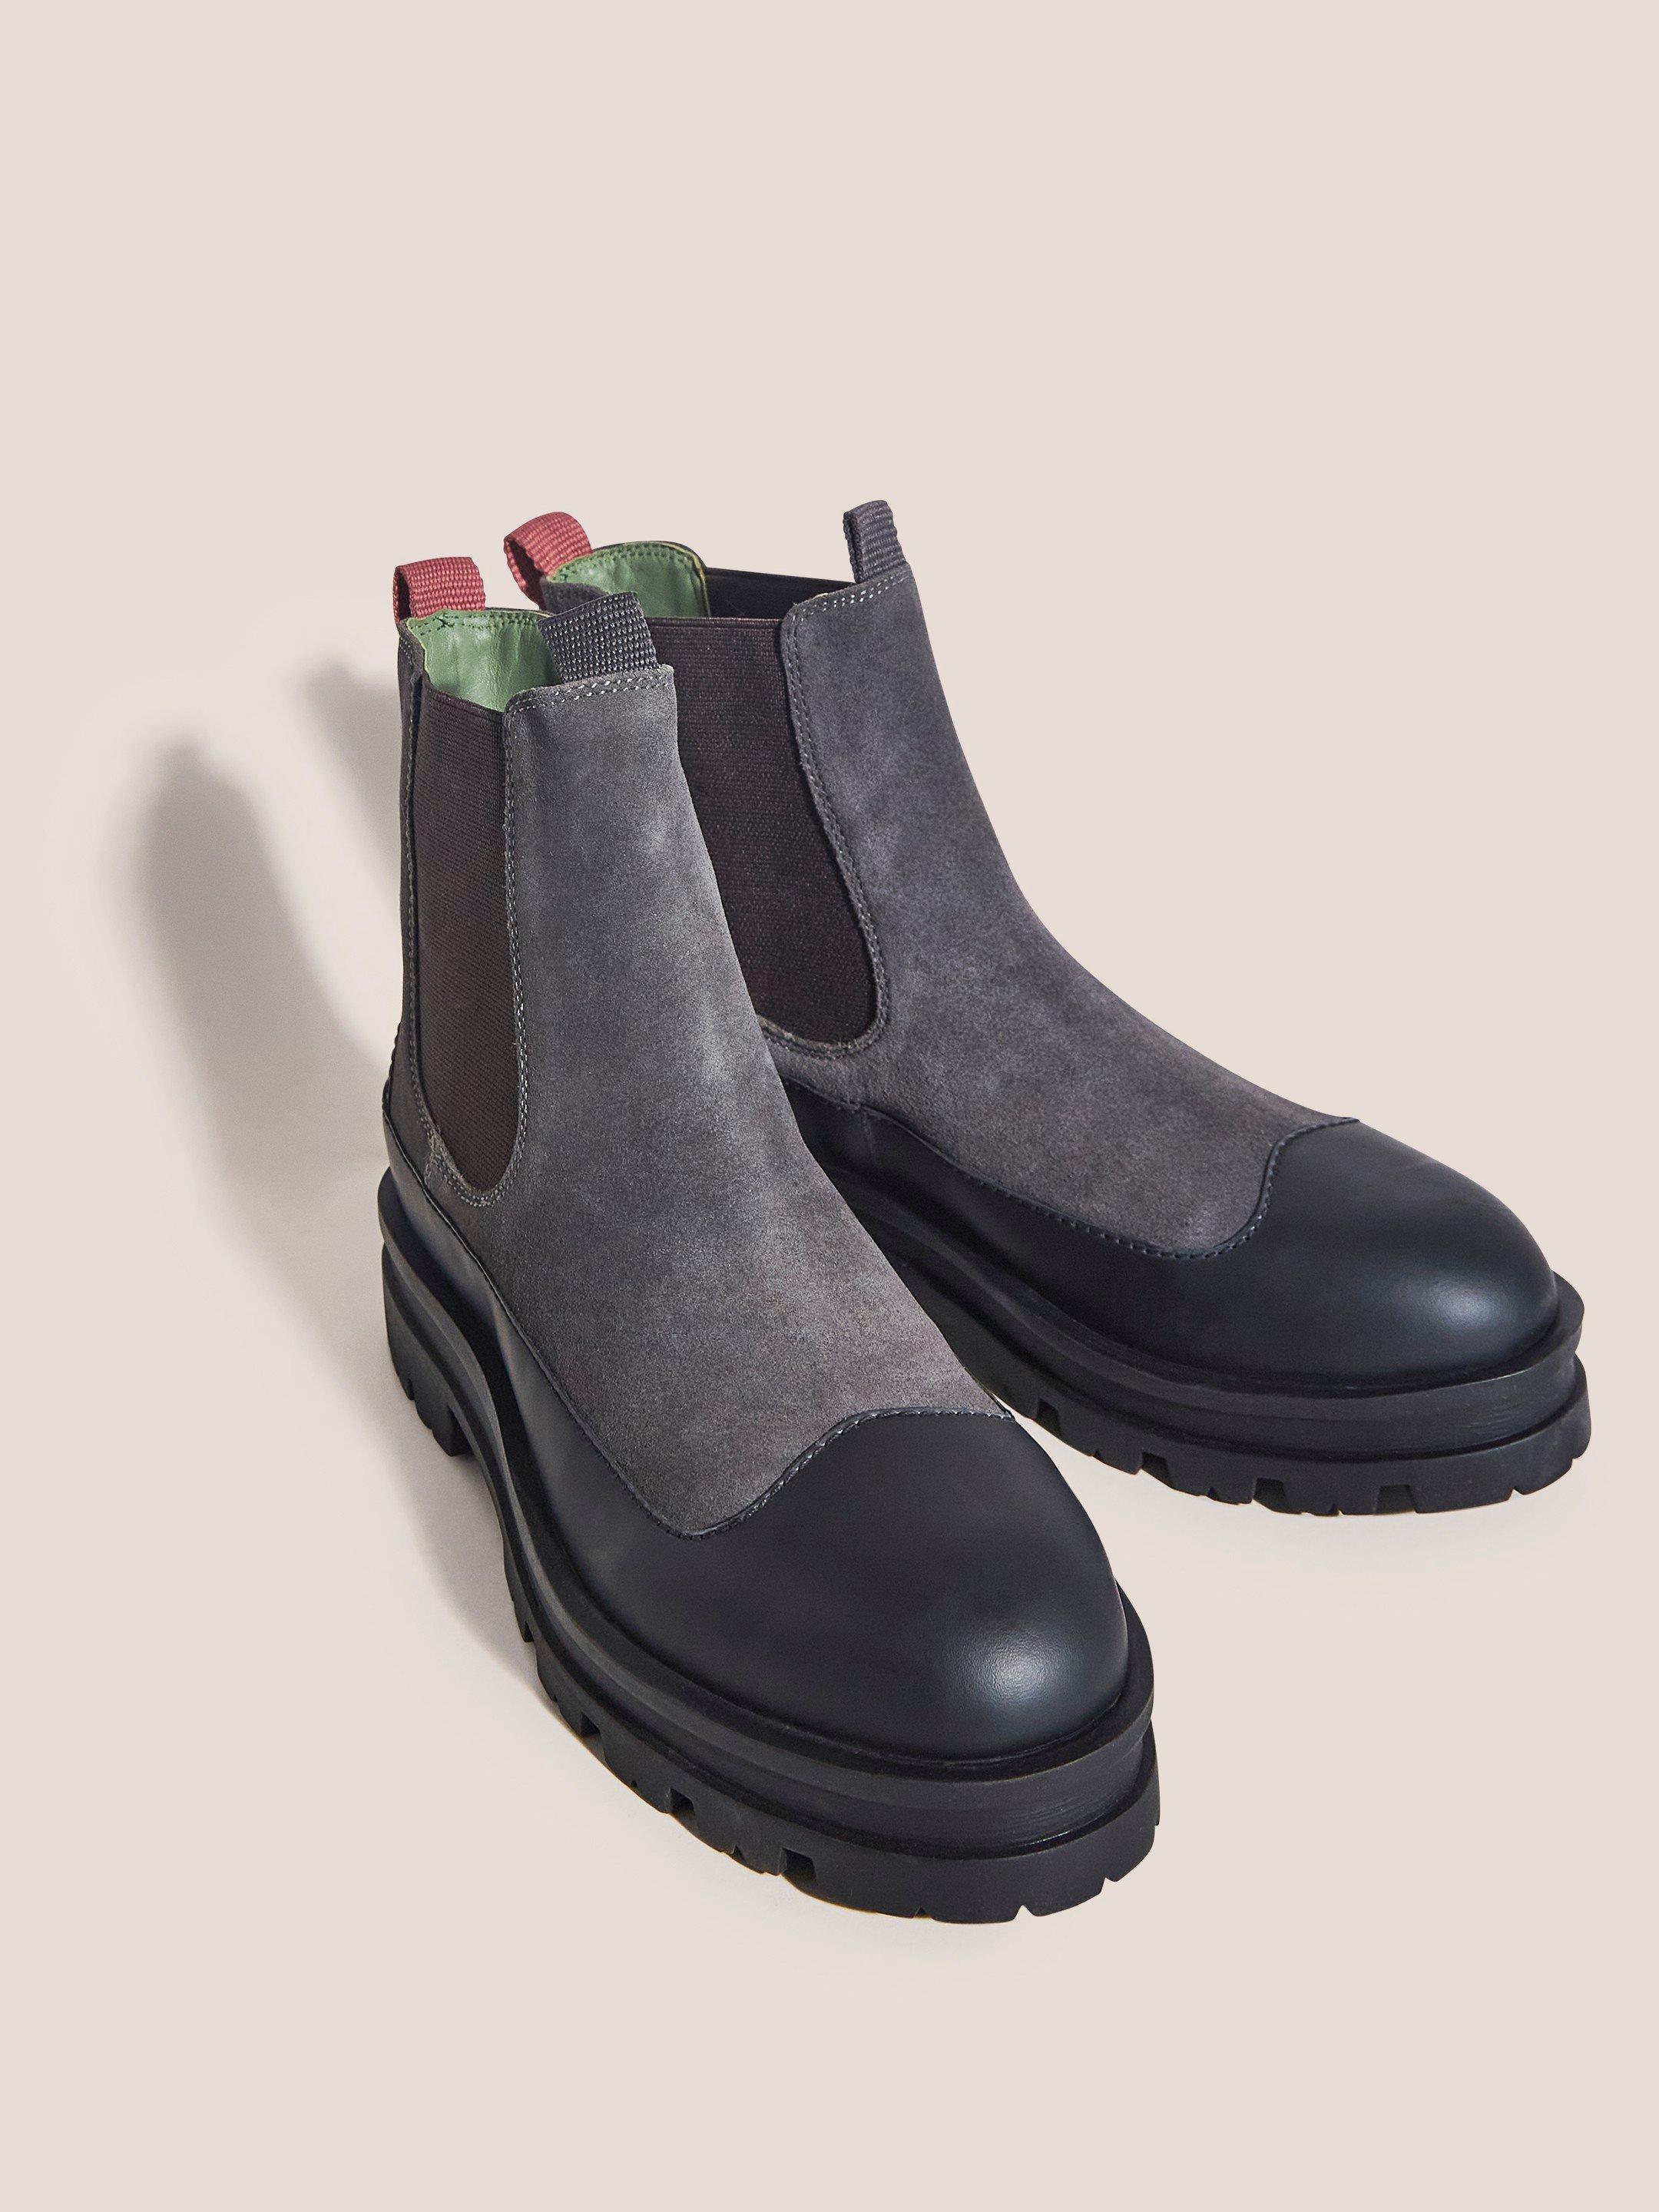 Puddle Chelsea Boot in GREY MLT - FLAT FRONT